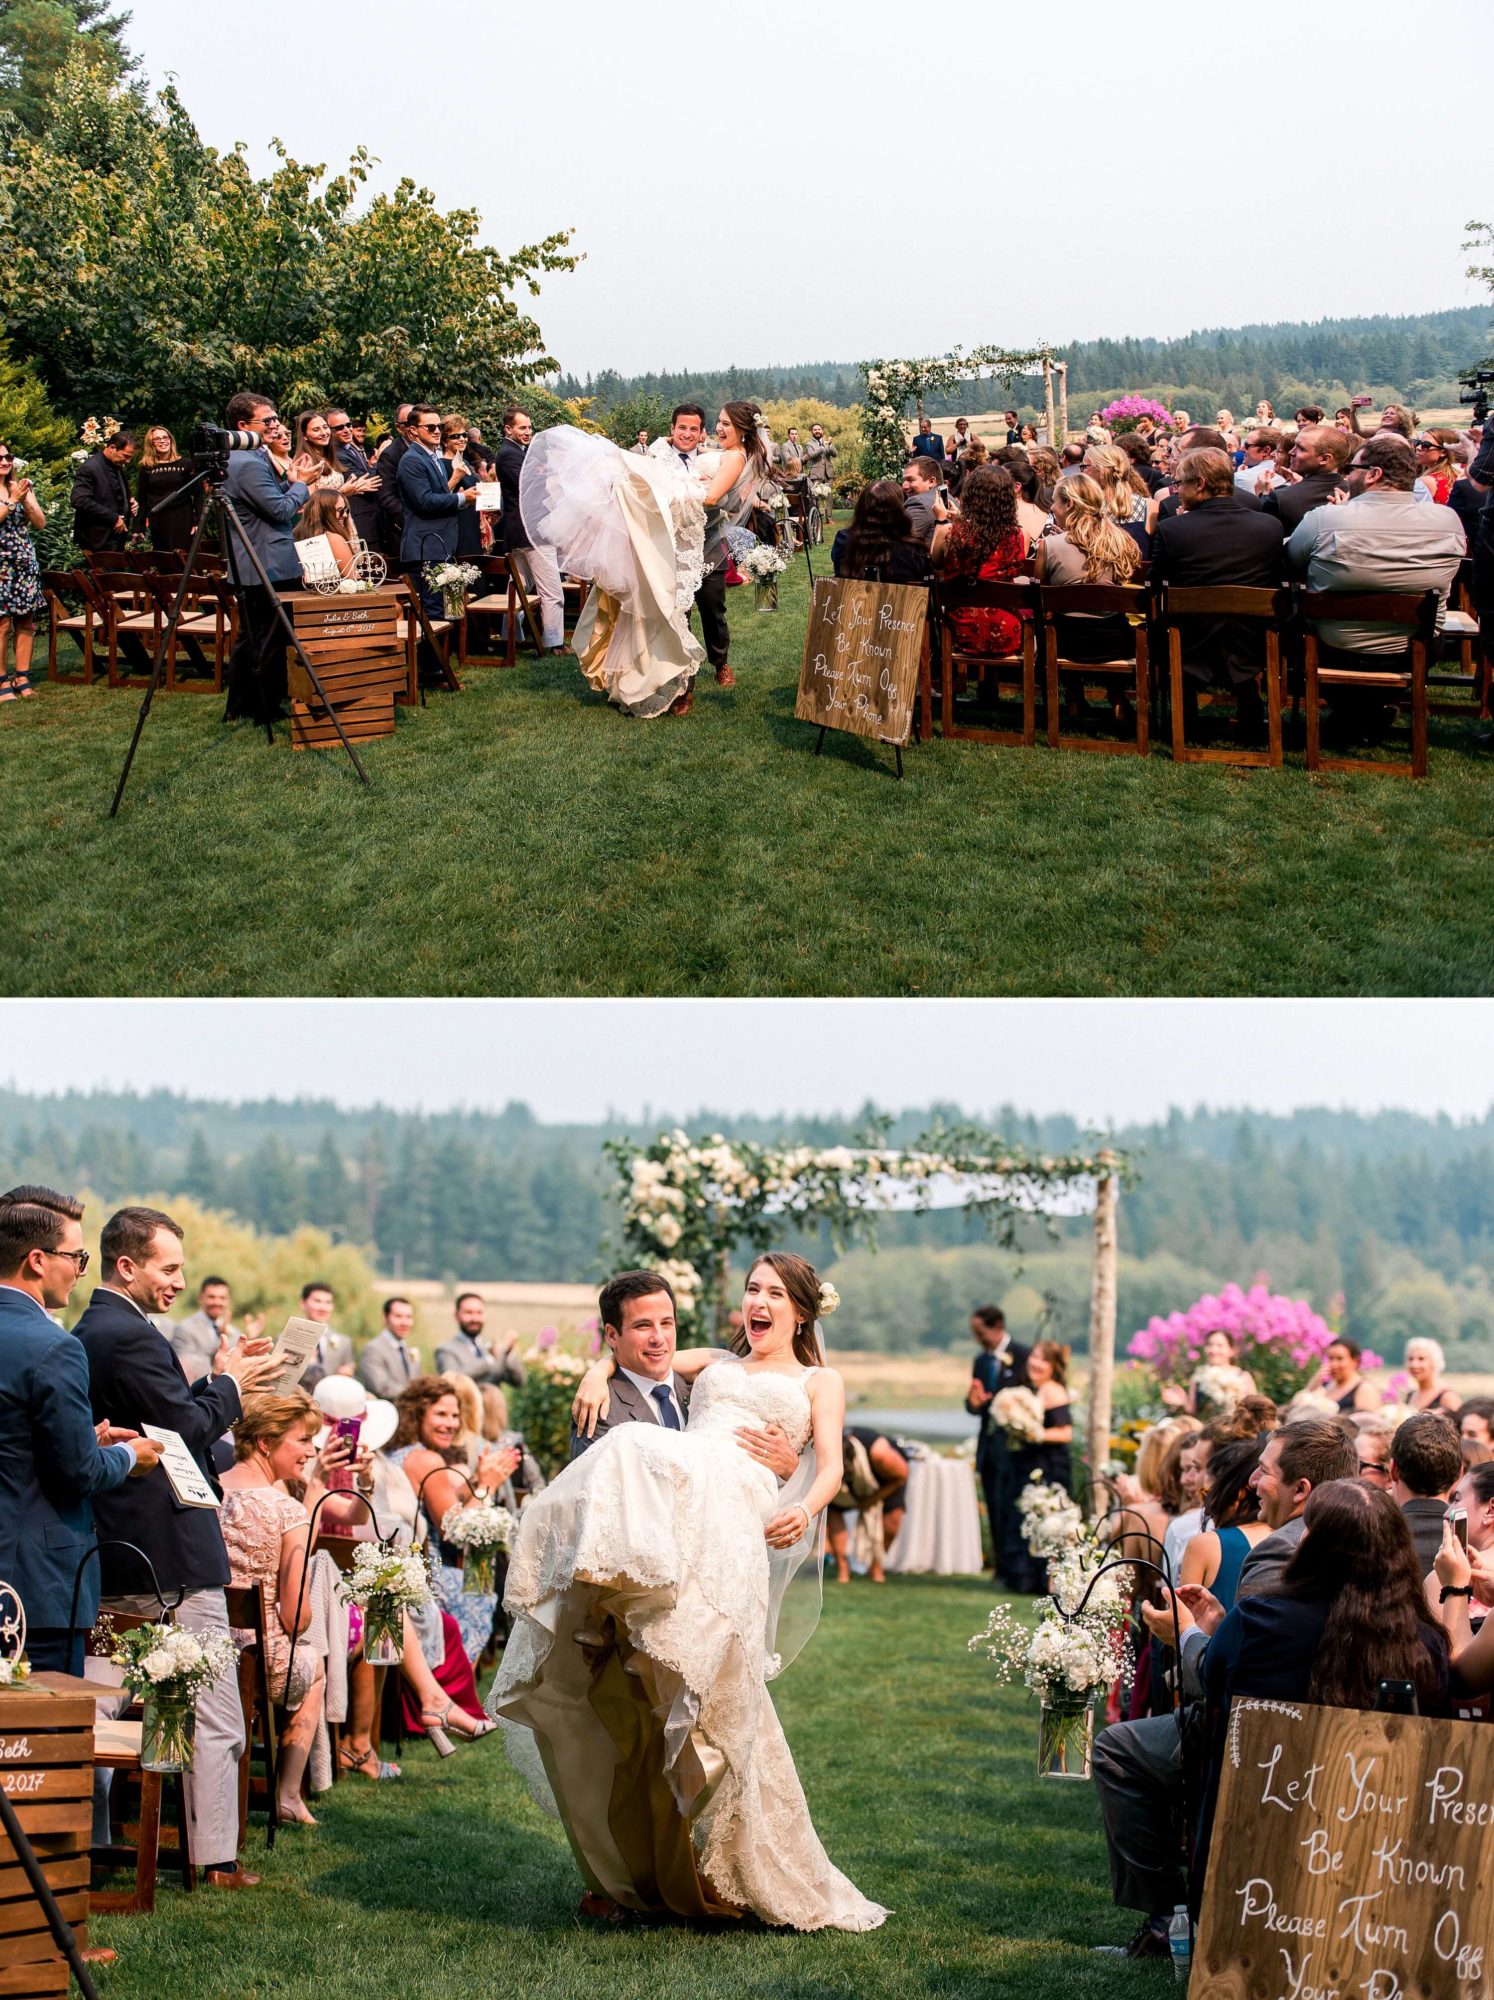 Groom carrying bride up aisle ending outdoor wedding ceremony